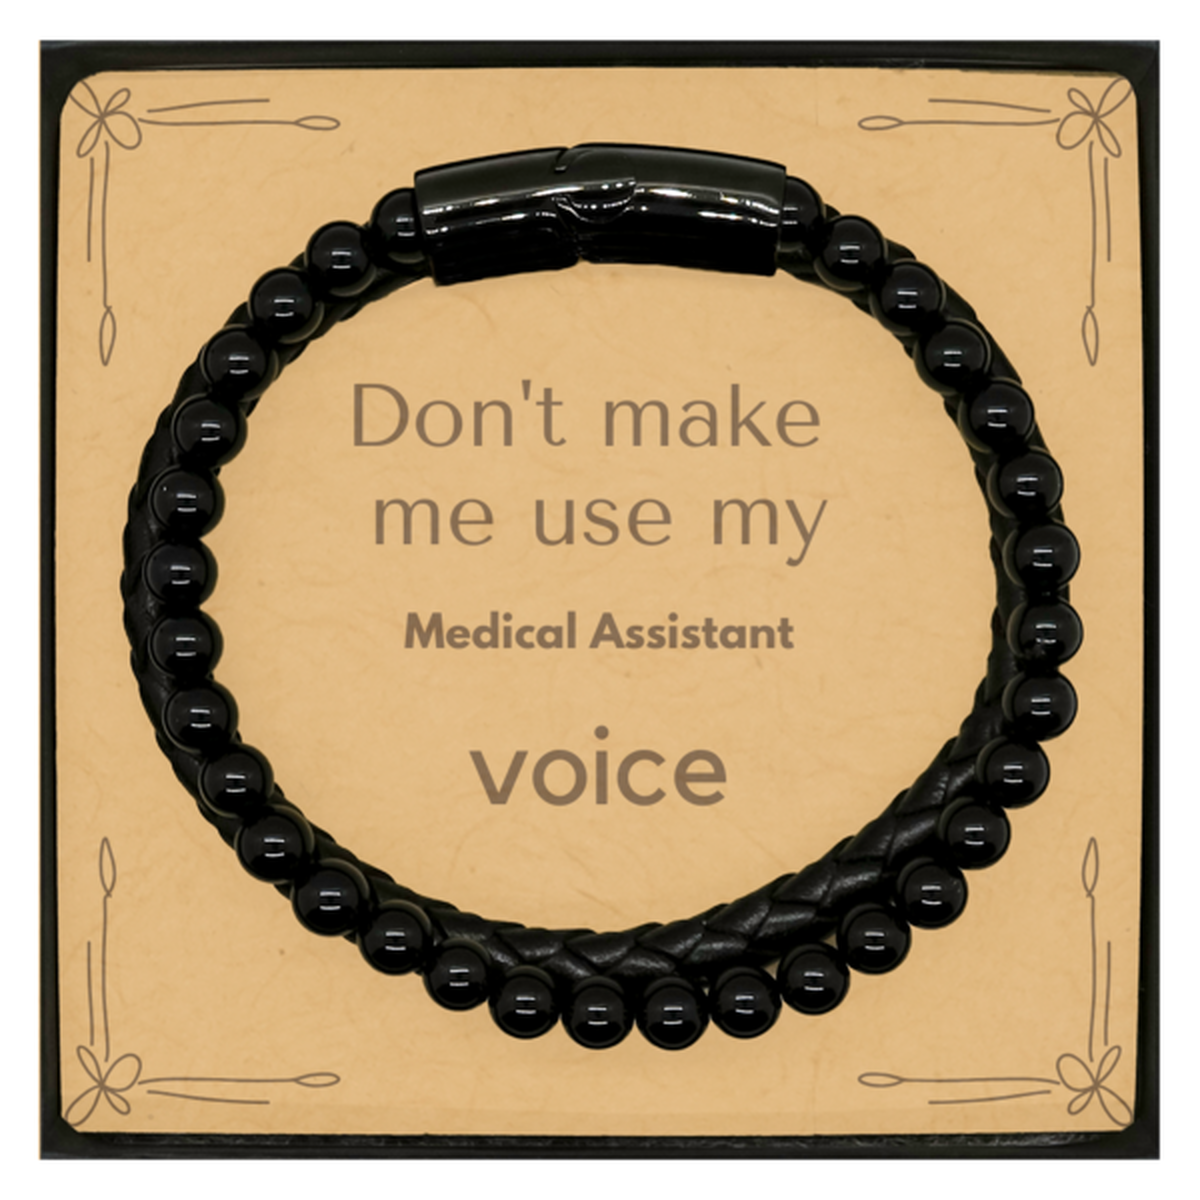 Don't make me use my Medical Assistant voice, Sarcasm Medical Assistant Card Gifts, Christmas Medical Assistant Stone Leather Bracelets Birthday Unique Gifts For Medical Assistant Coworkers, Men, Women, Colleague, Friends